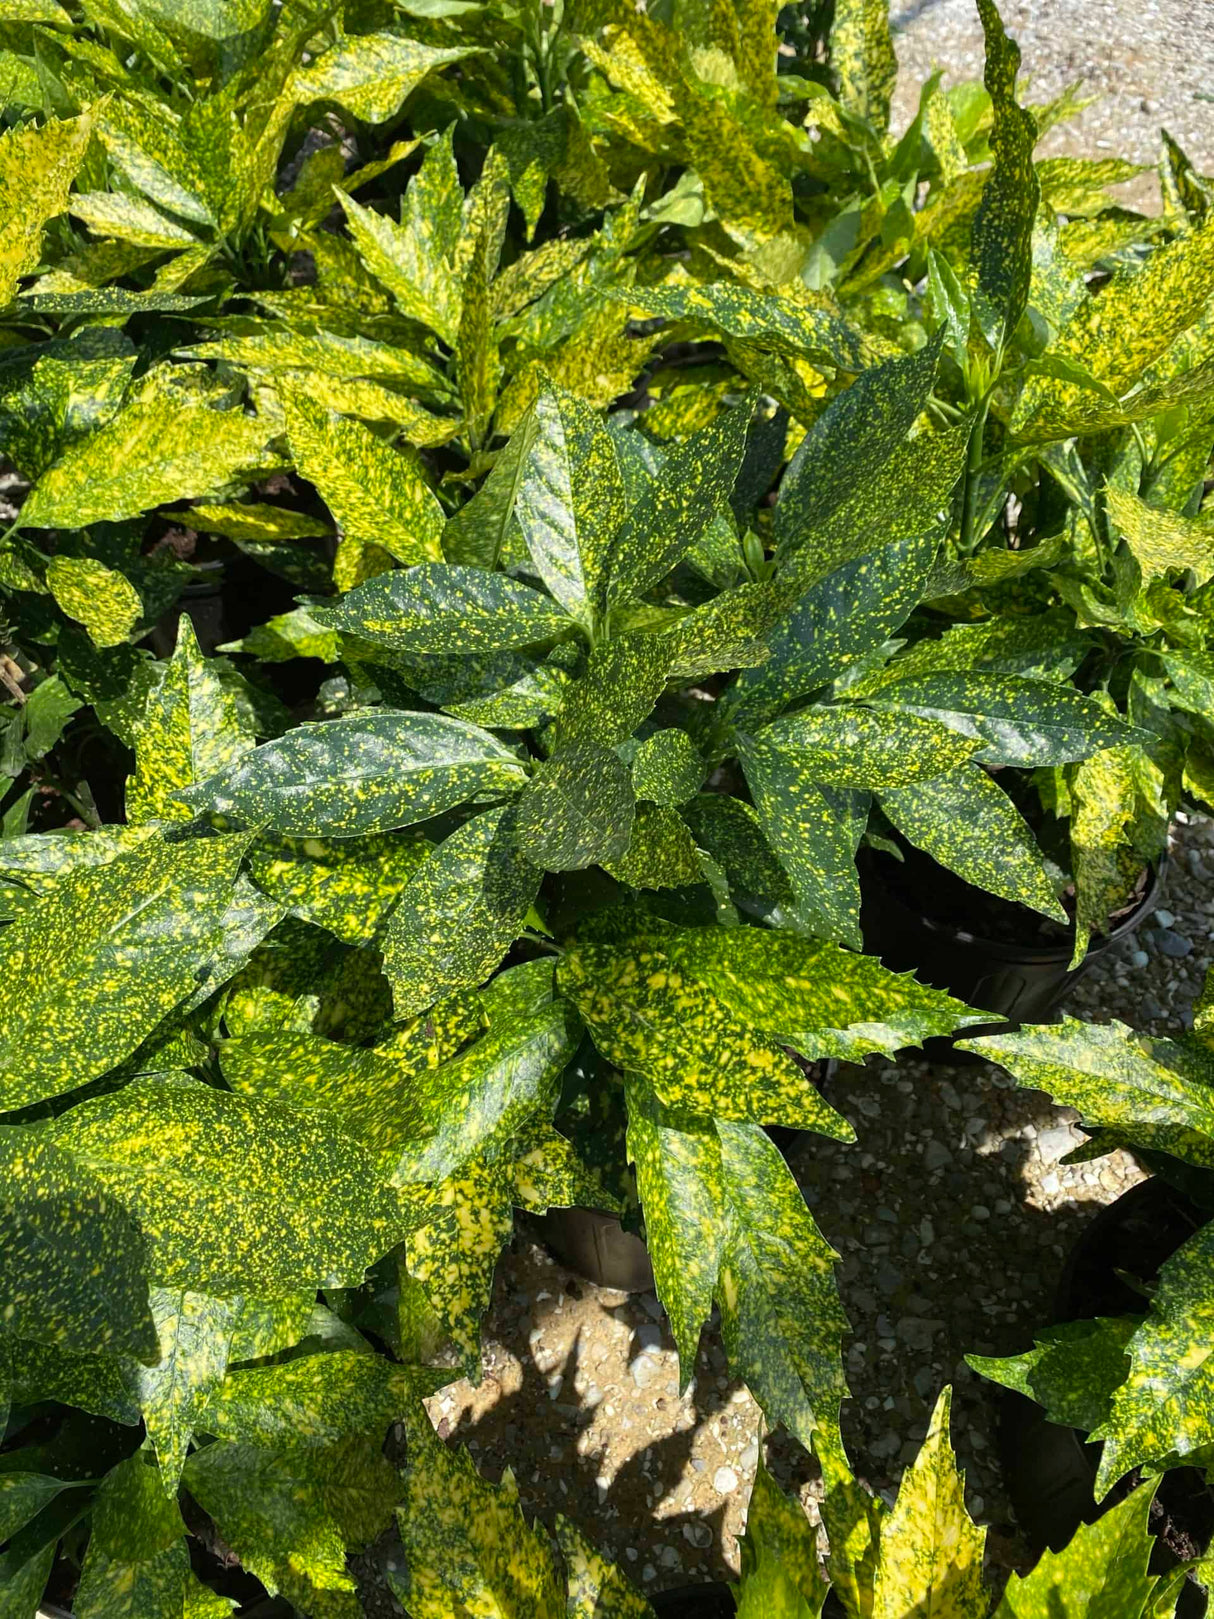 Gold Dust Variegated Aucuba Japonica foliage with green and yellow spec leaves